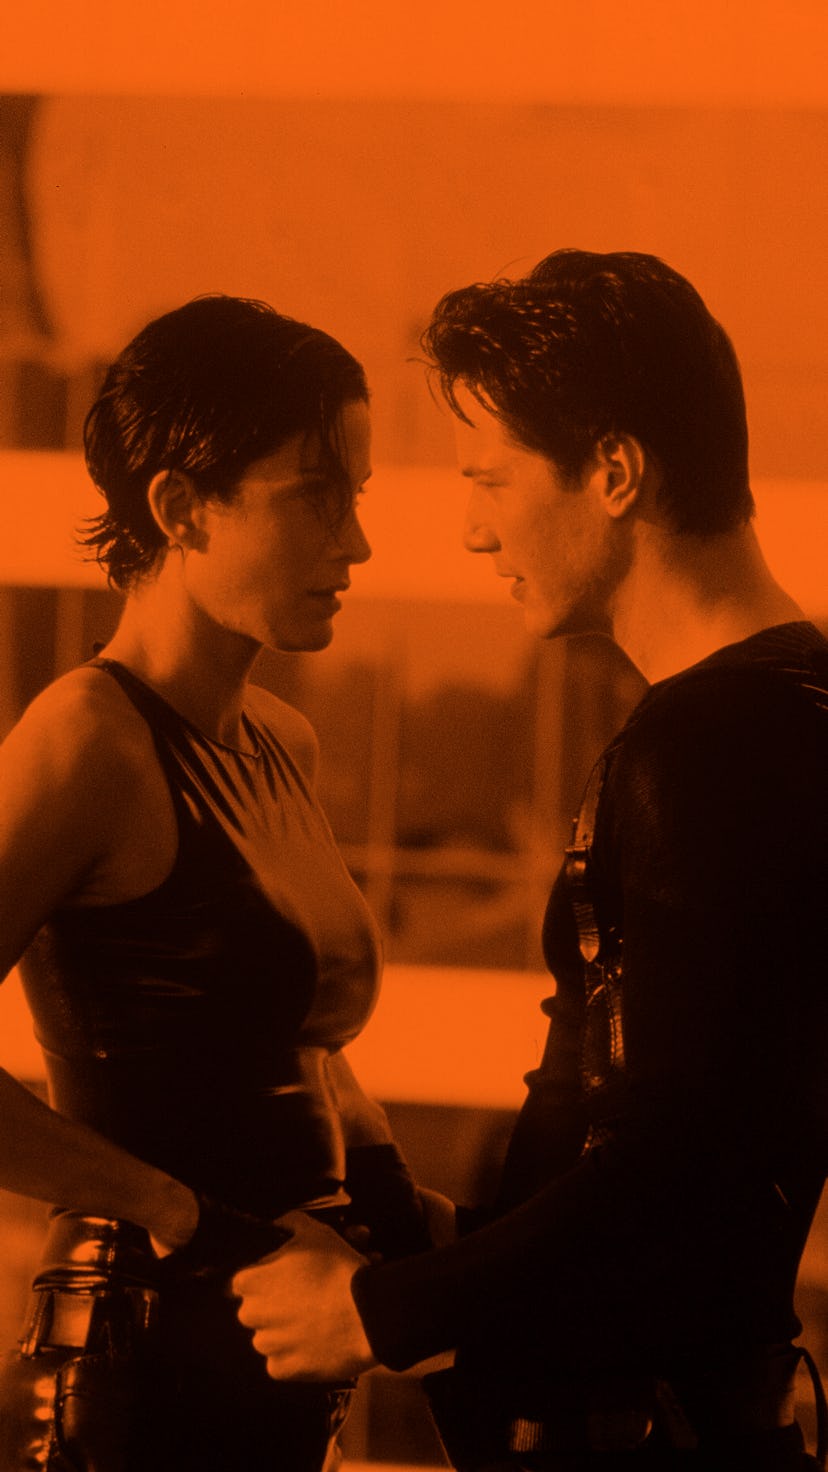 Carrie-Anne Moss in all-black latex and Keanu Reeves in all-black in "The Matrix"